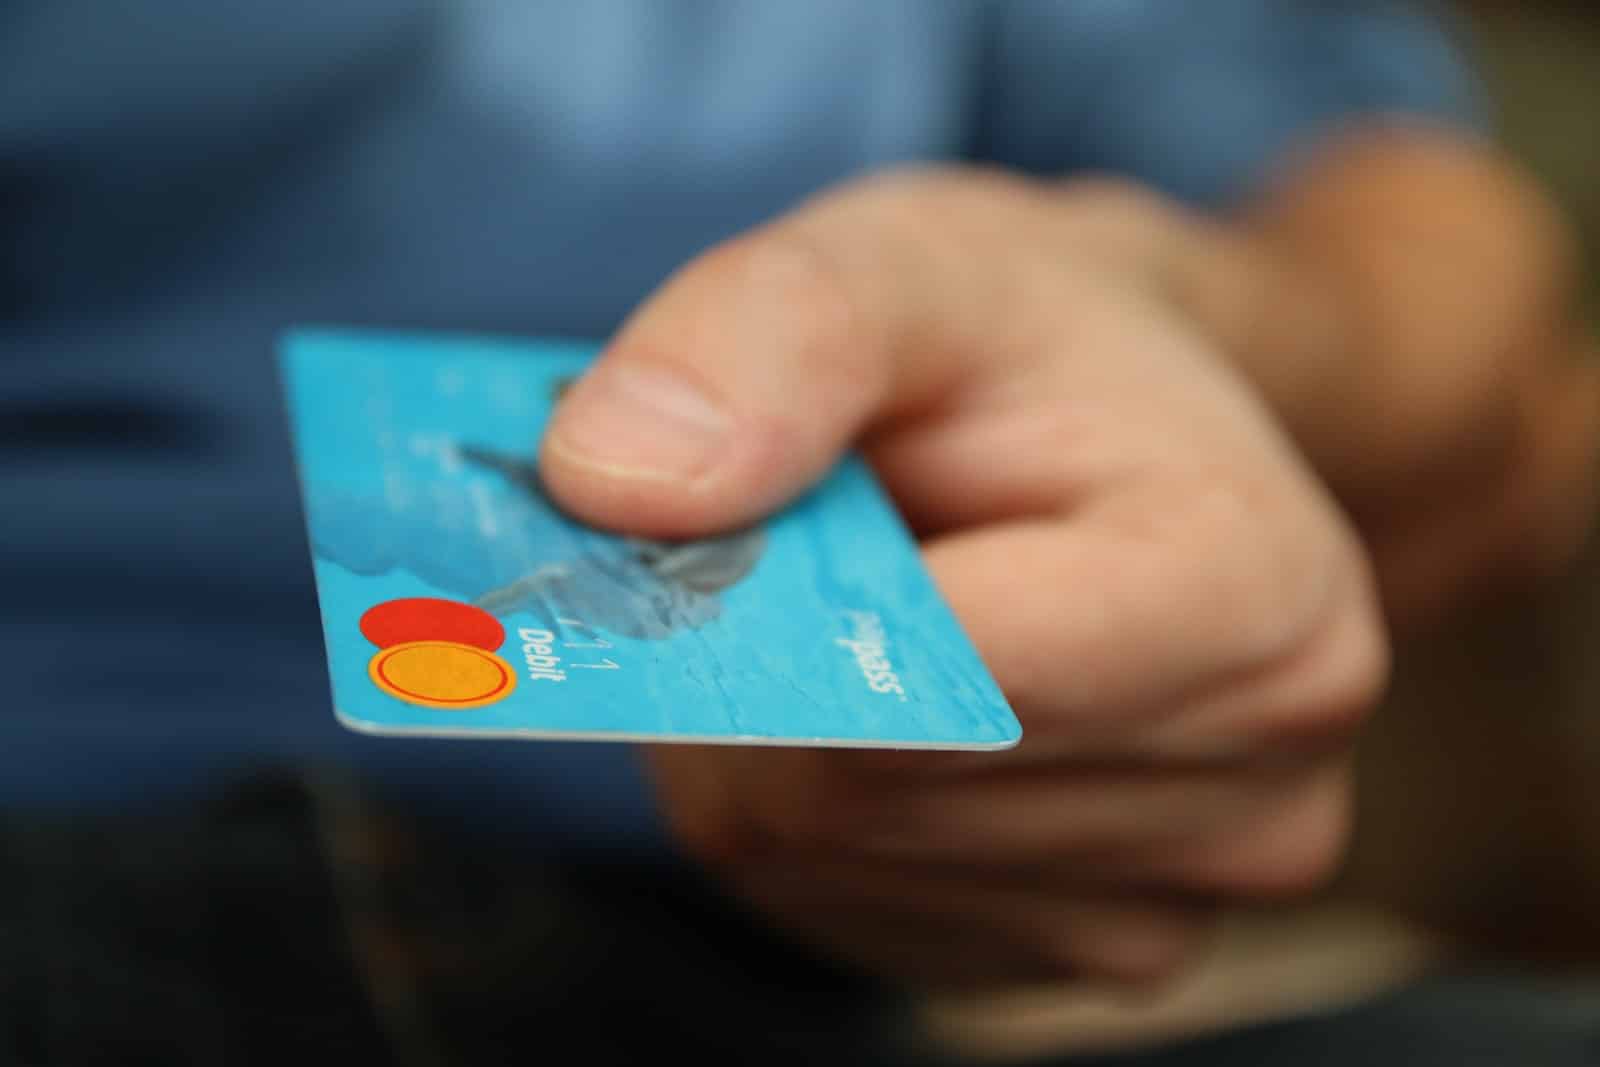 Man holding a credit card in the new era of retail.